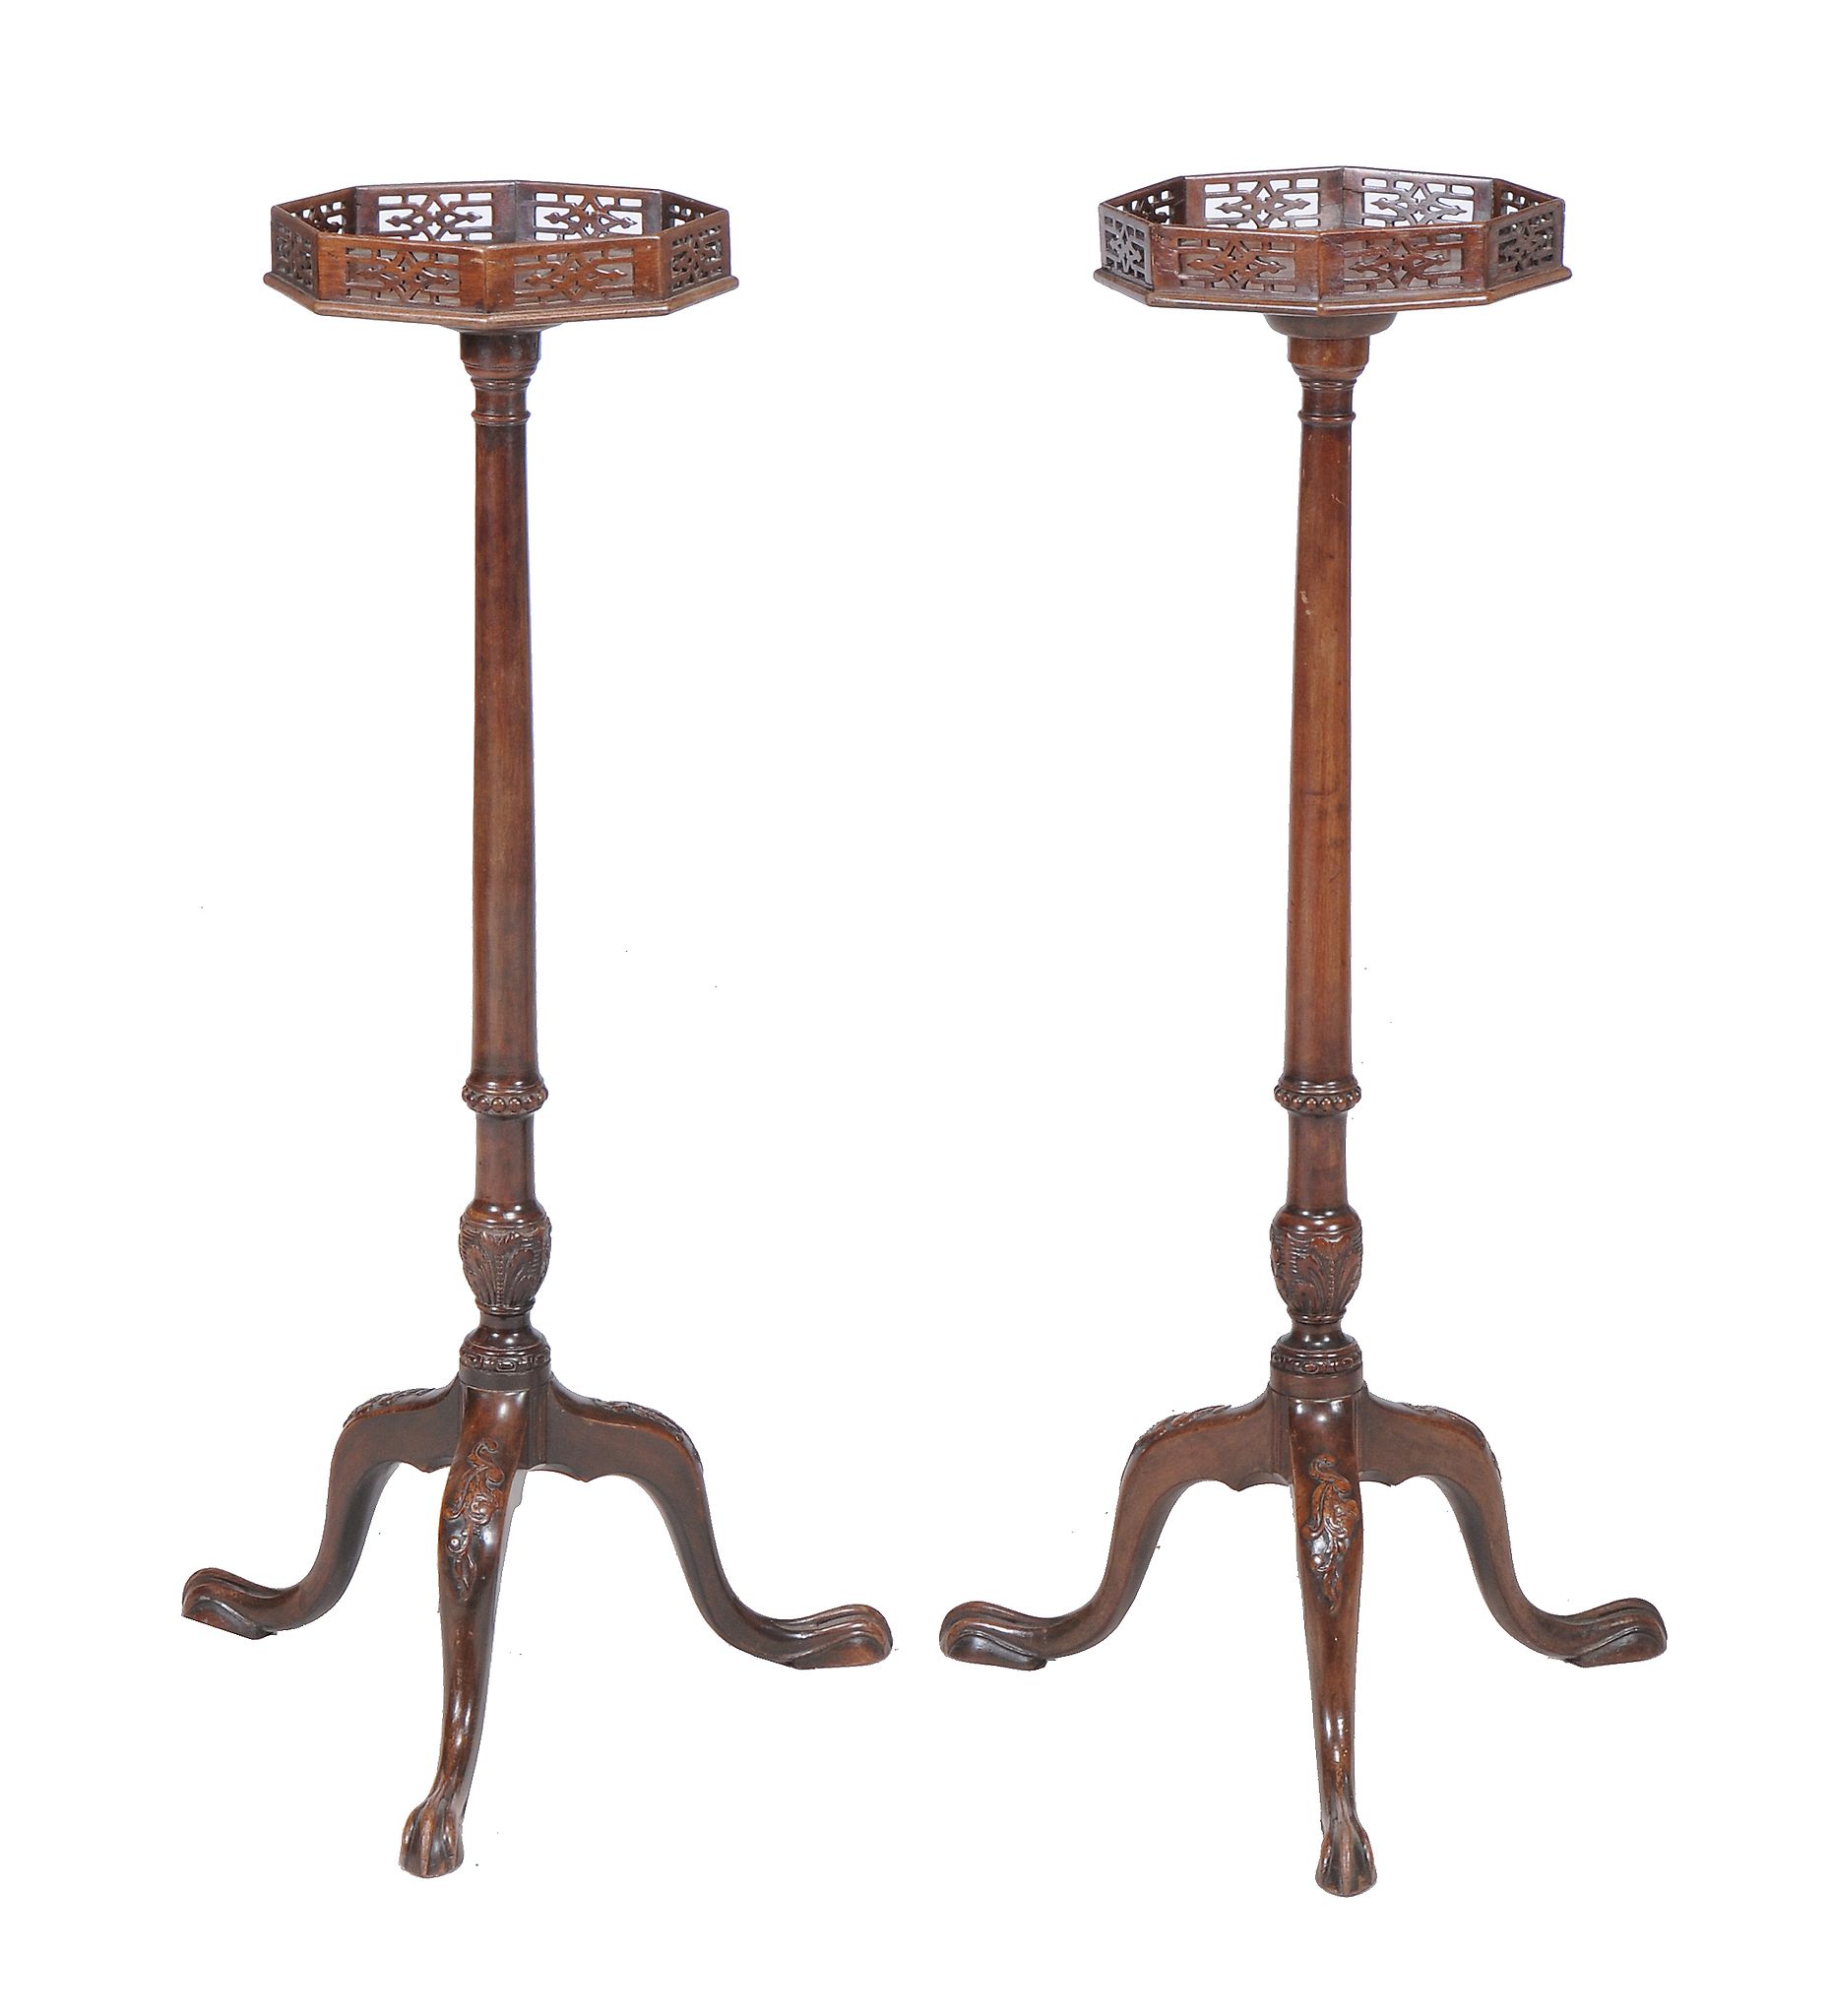 A pair of mahogany torcheres in George III style, late 19th/early 20th century, each octagonal top